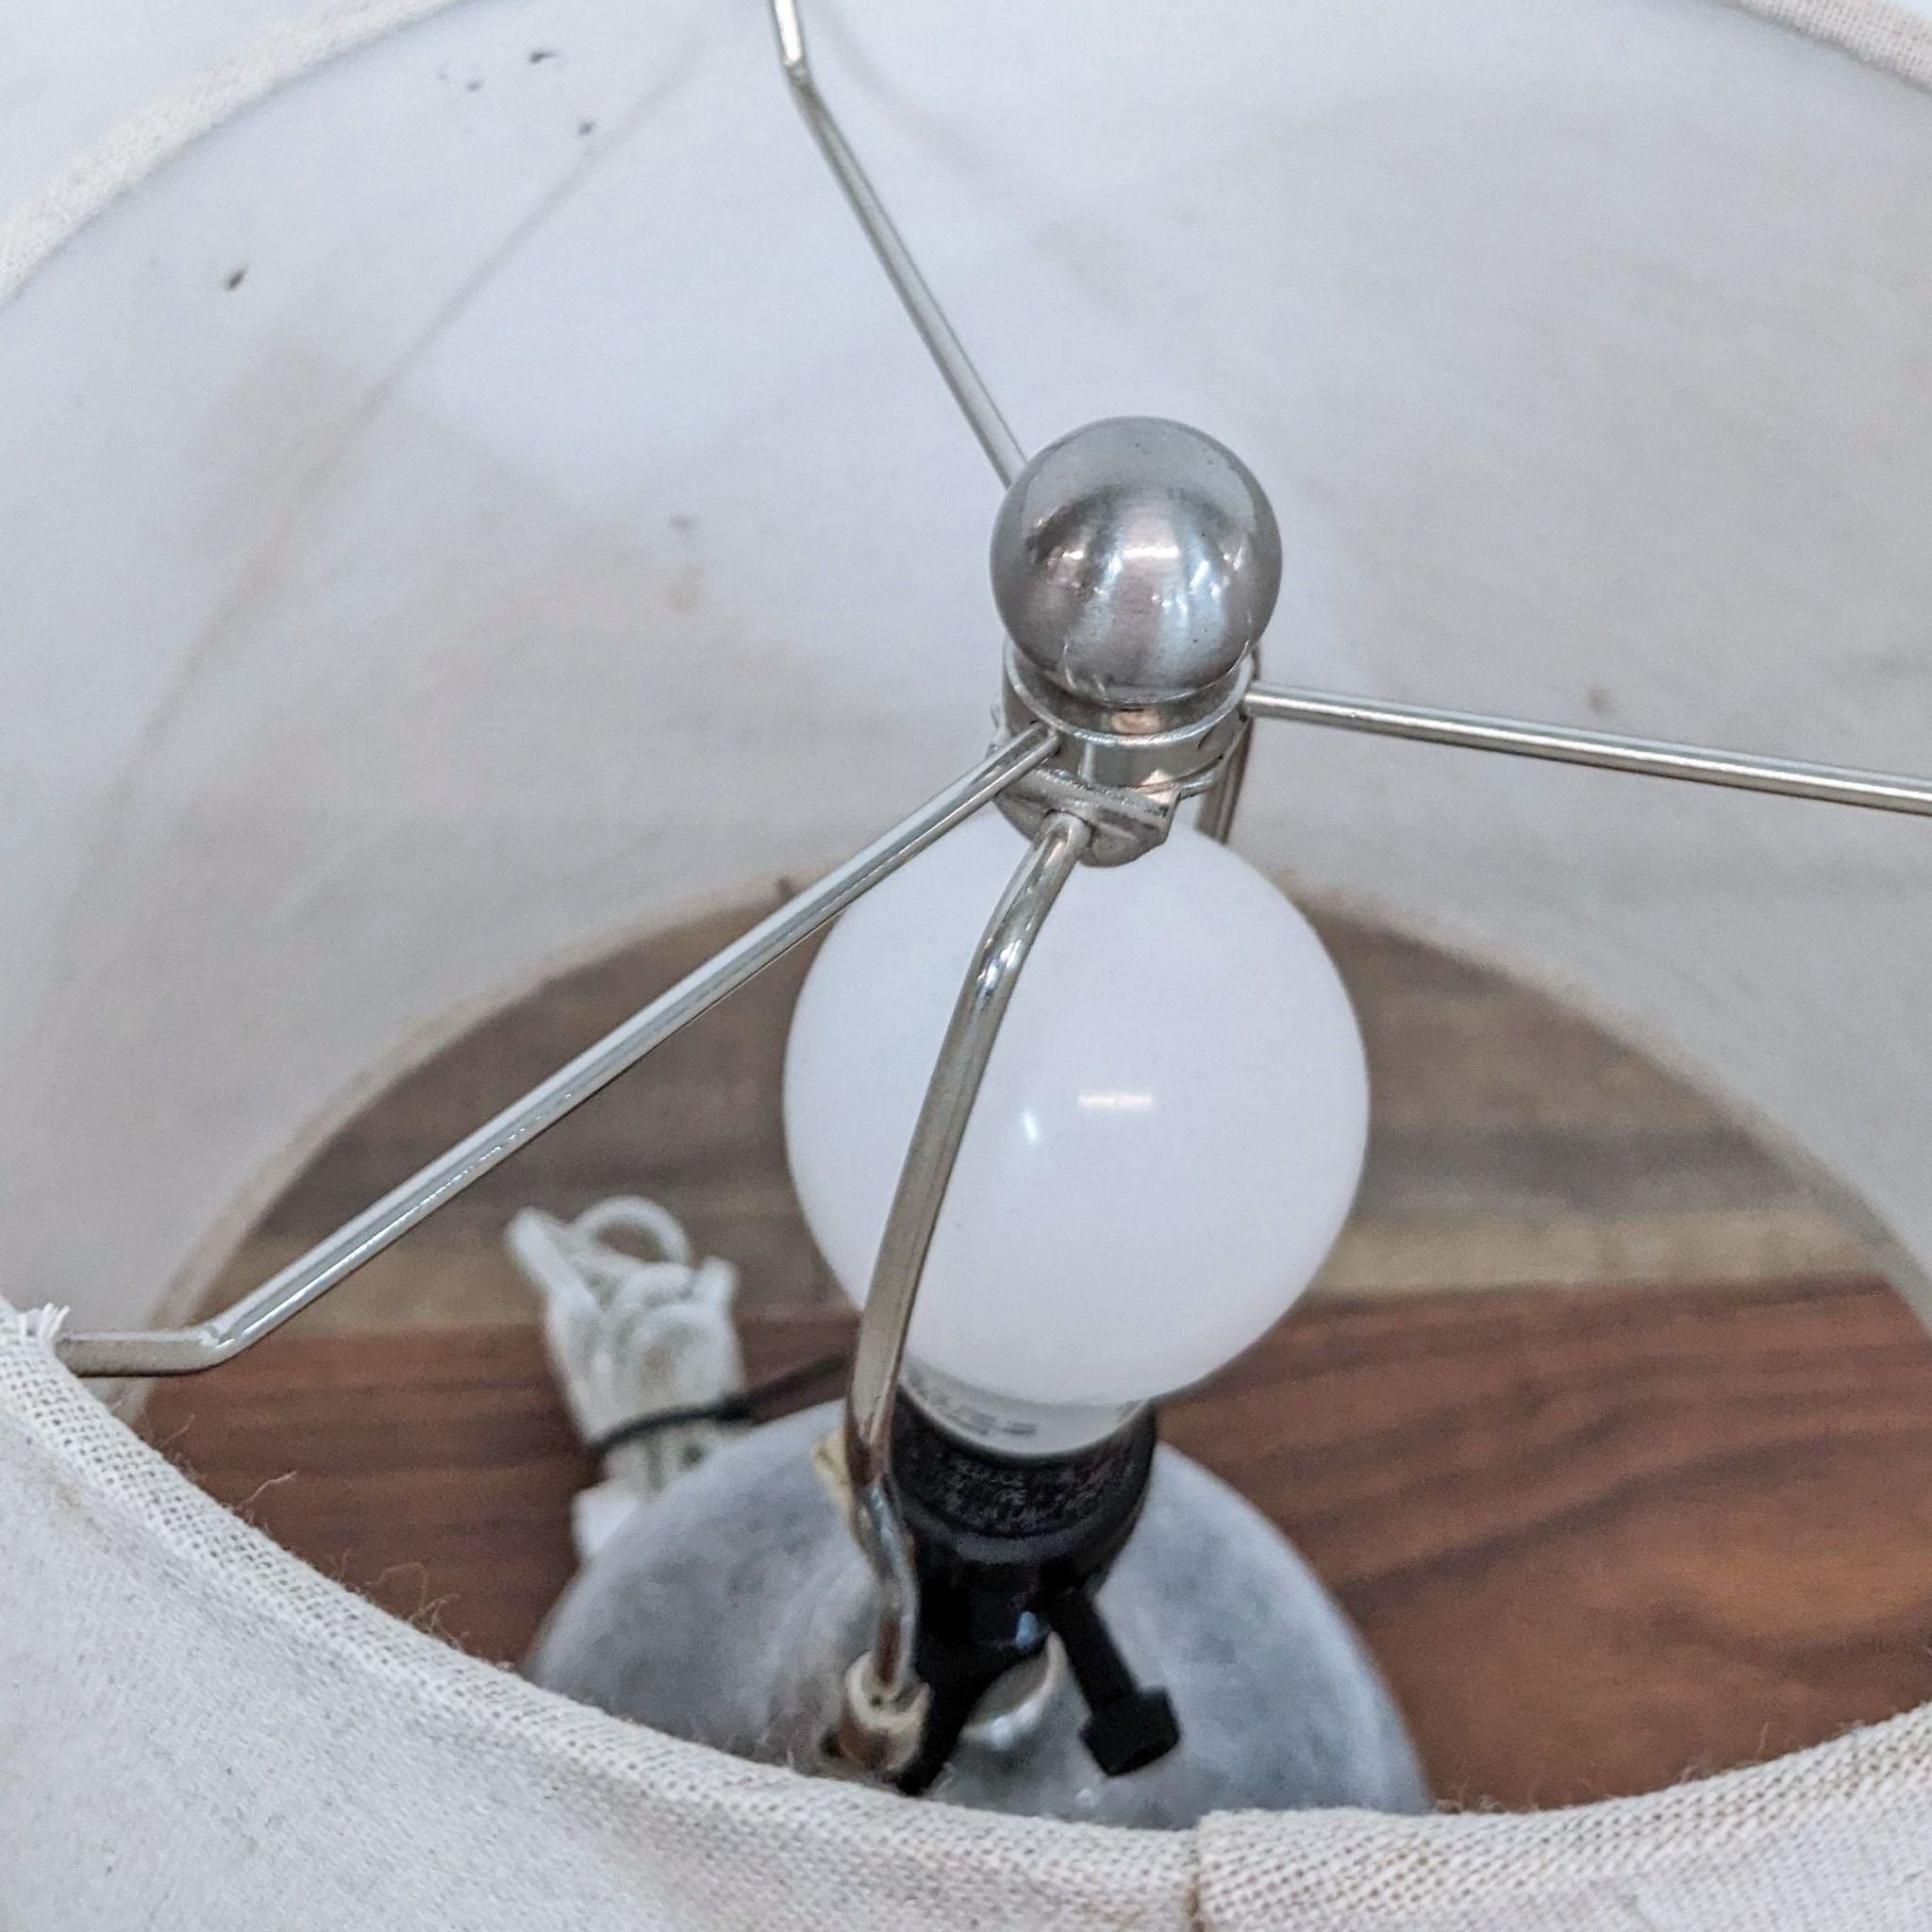 Reperch brand lamp with a white bulb and silver metallic fixture inside a fabric lampshade.